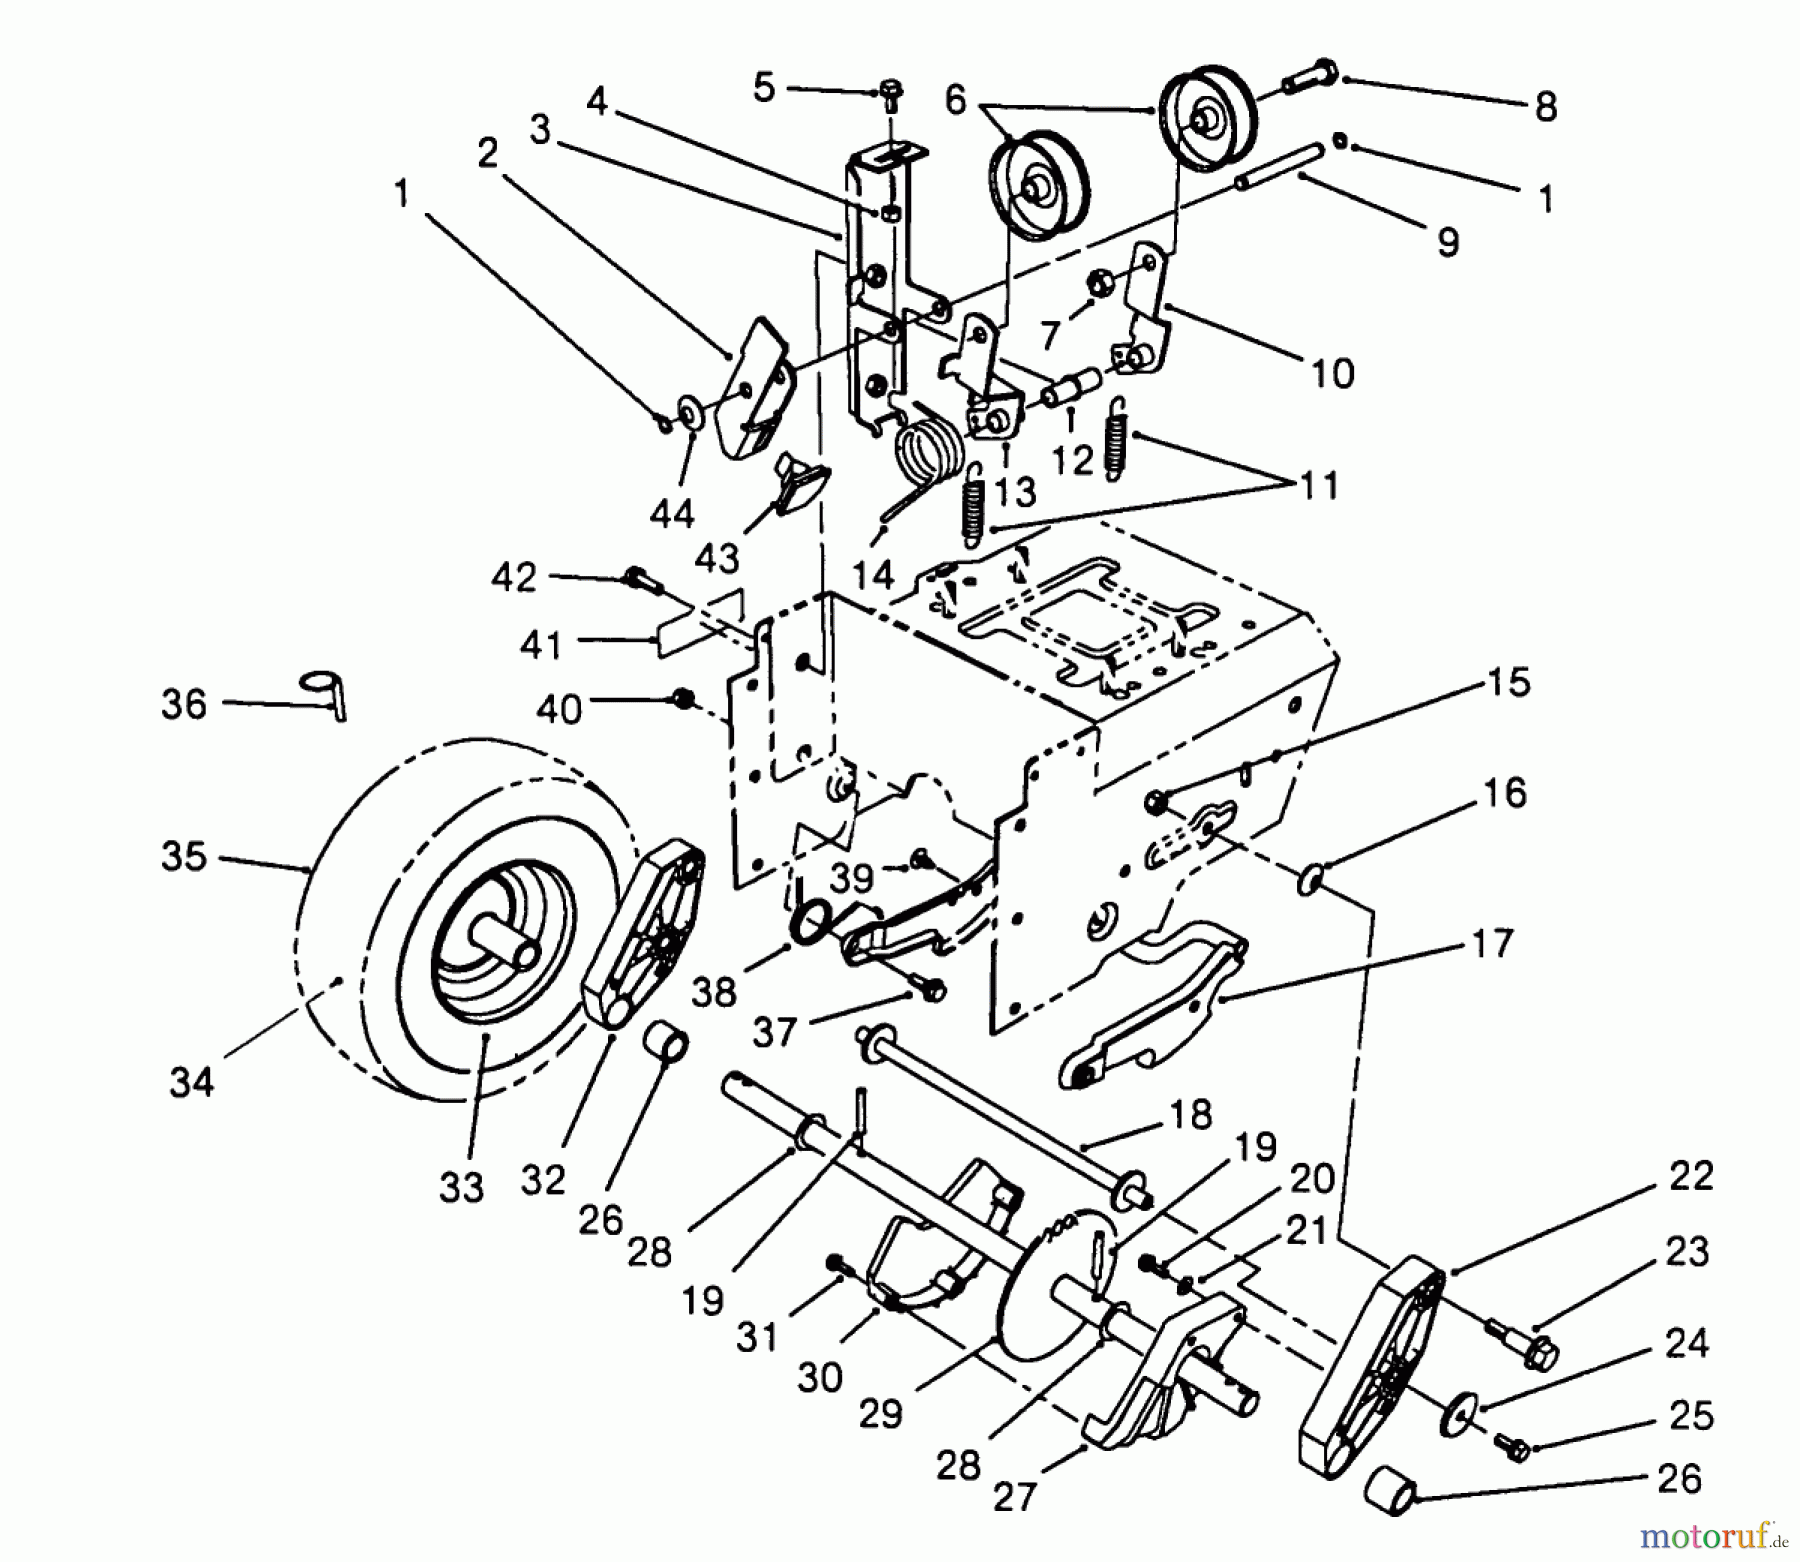  Toro Neu Snow Blowers/Snow Throwers Seite 1 38570 (828) - Toro 828 Power Shift Snowthrower, 1988 (8000001-8999999) TRACTION DRIVE ASSEMBLY